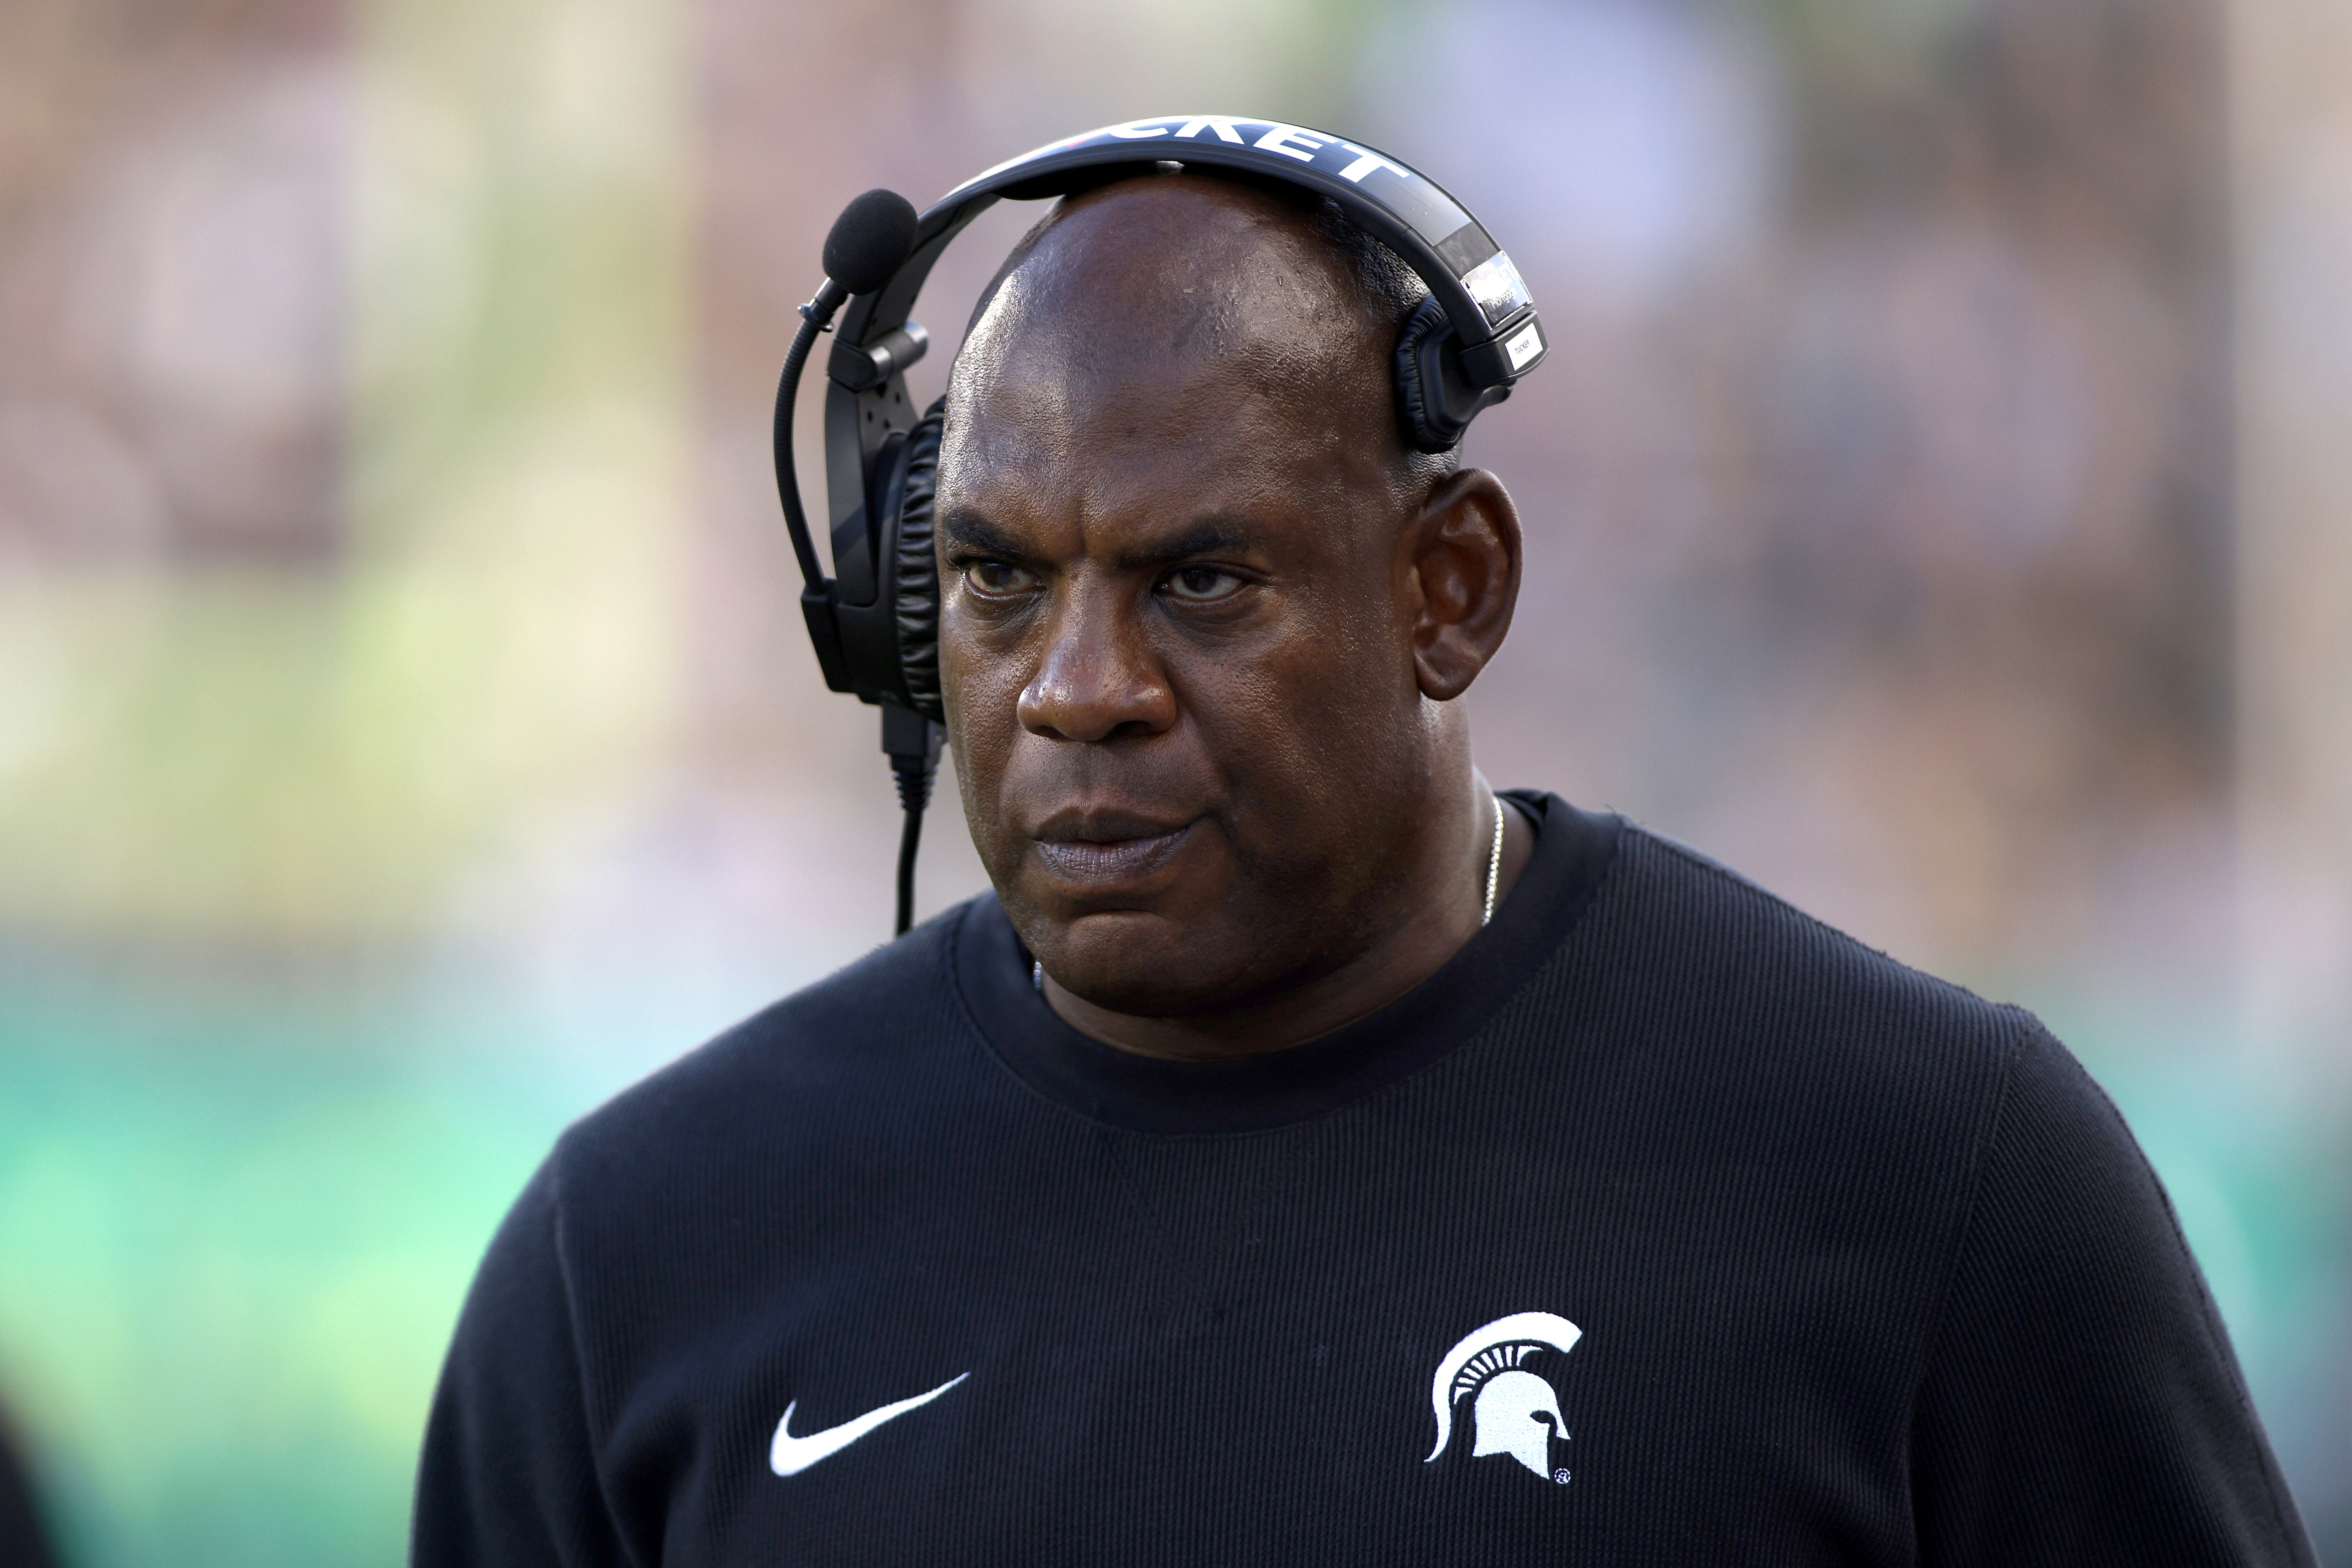 Mel Tuckers attorney Michigan State doesnt have cause to fire suspended coach over phone